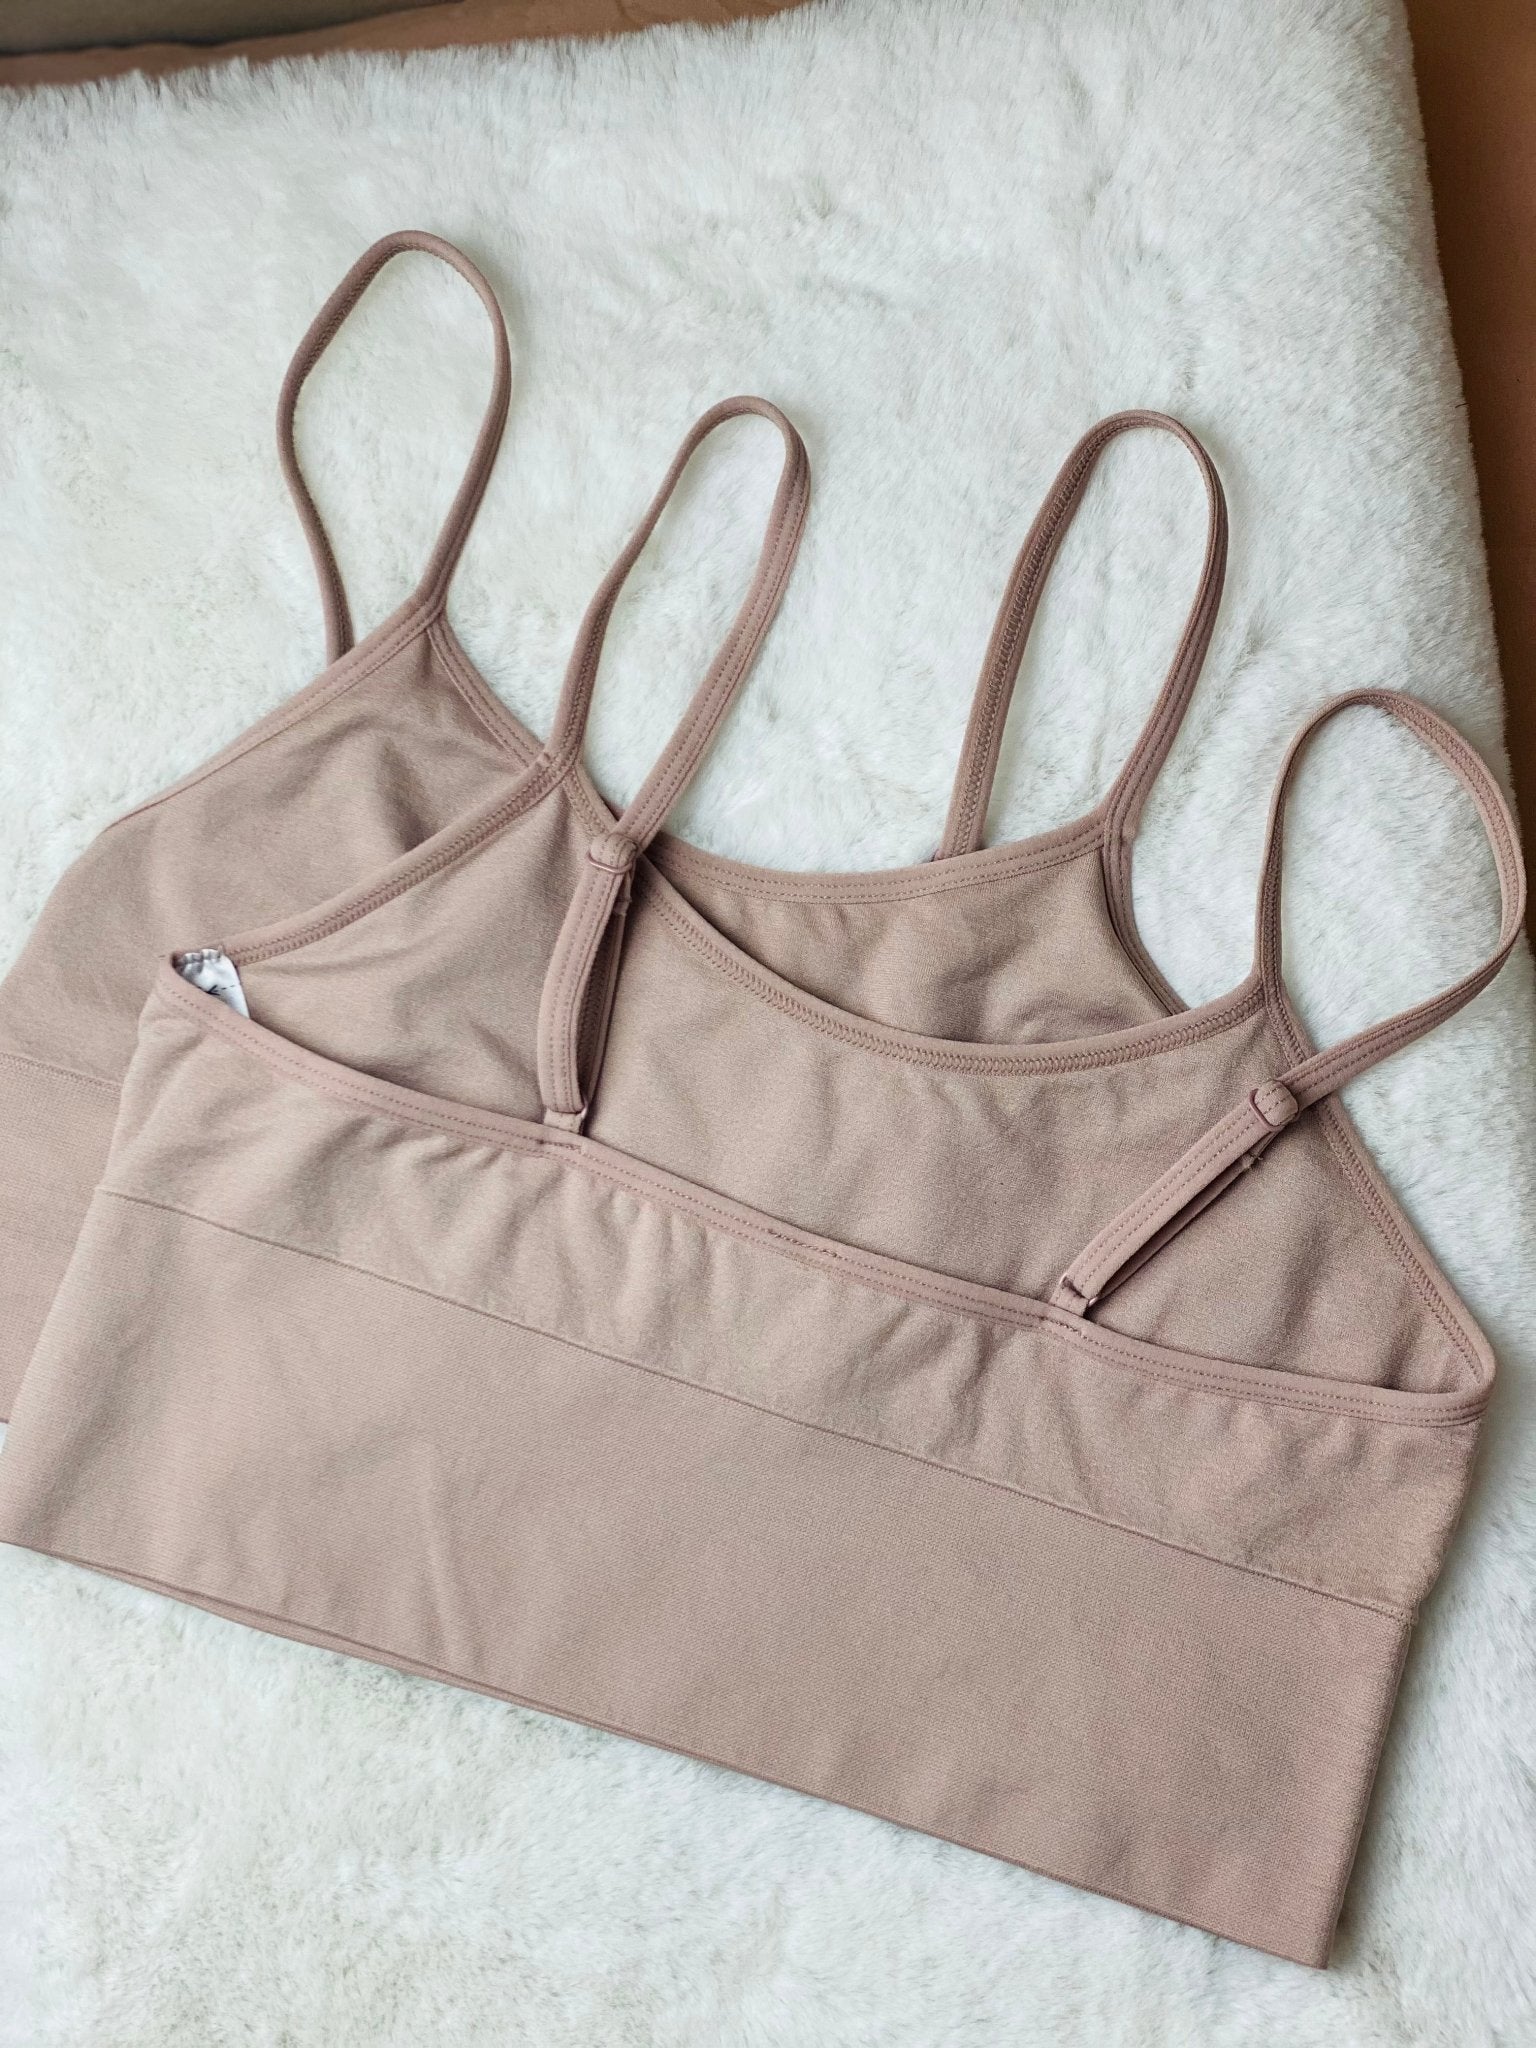 Your Everyday Seamless Bralette - Shop AffairAccessories80585914